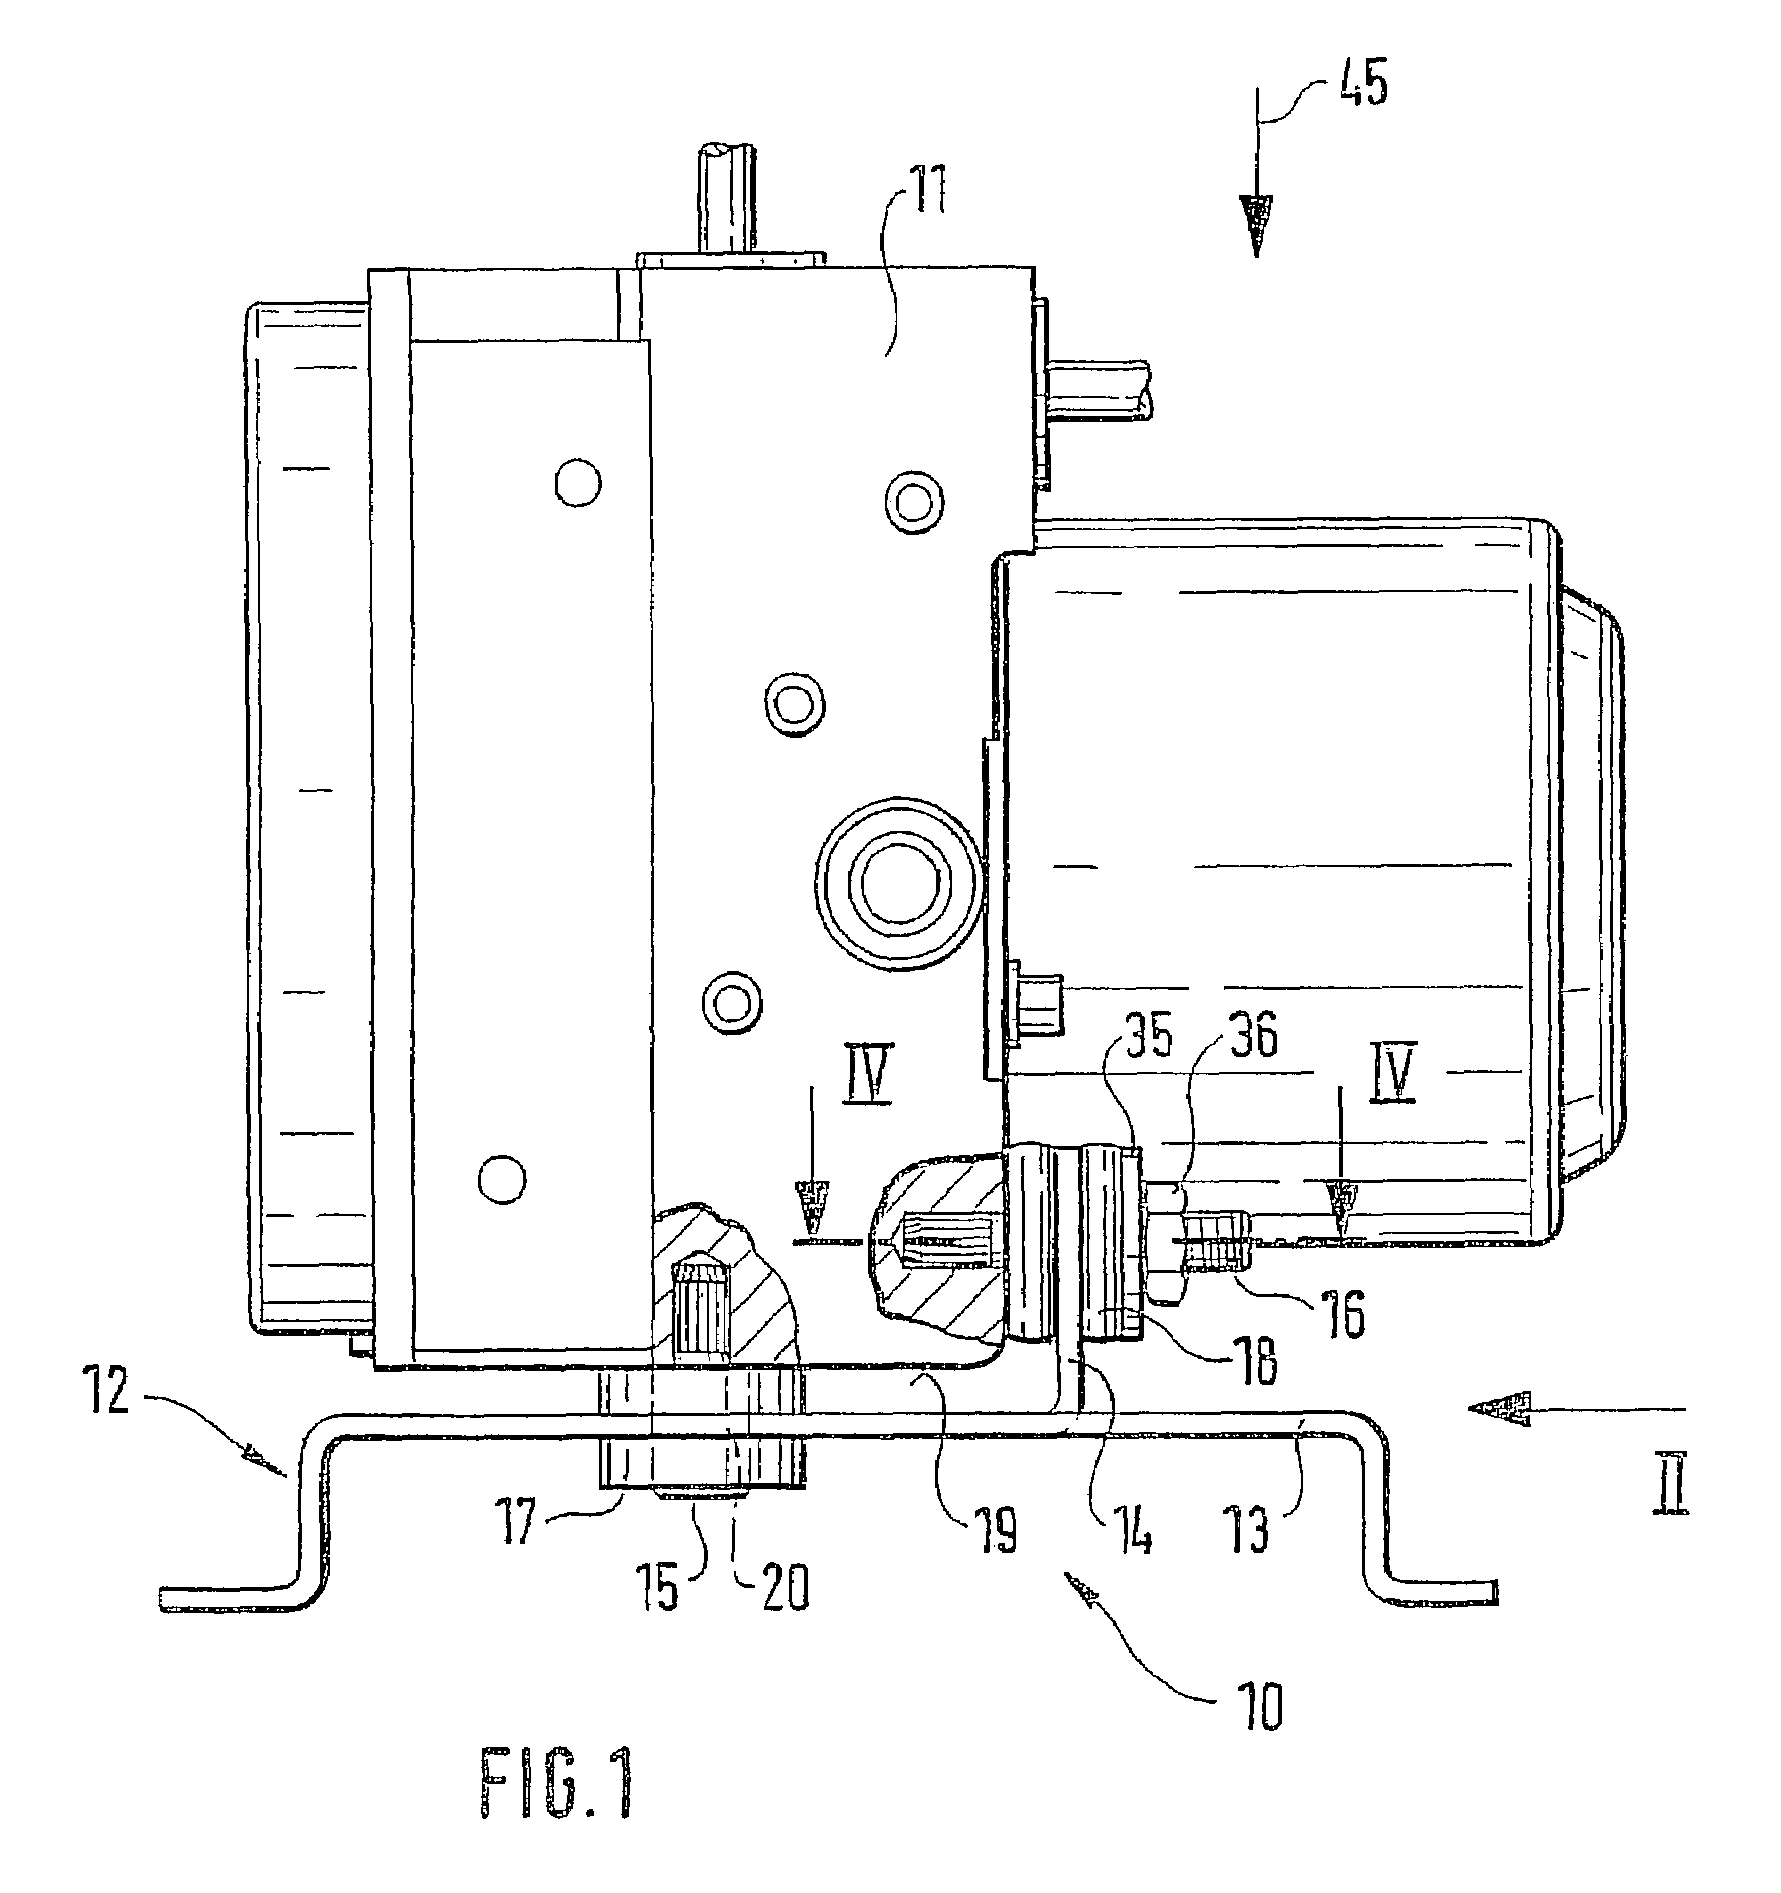 Device for the elastic mounting of a hydraulic unit in a motor vehicle braking system on a vehicle